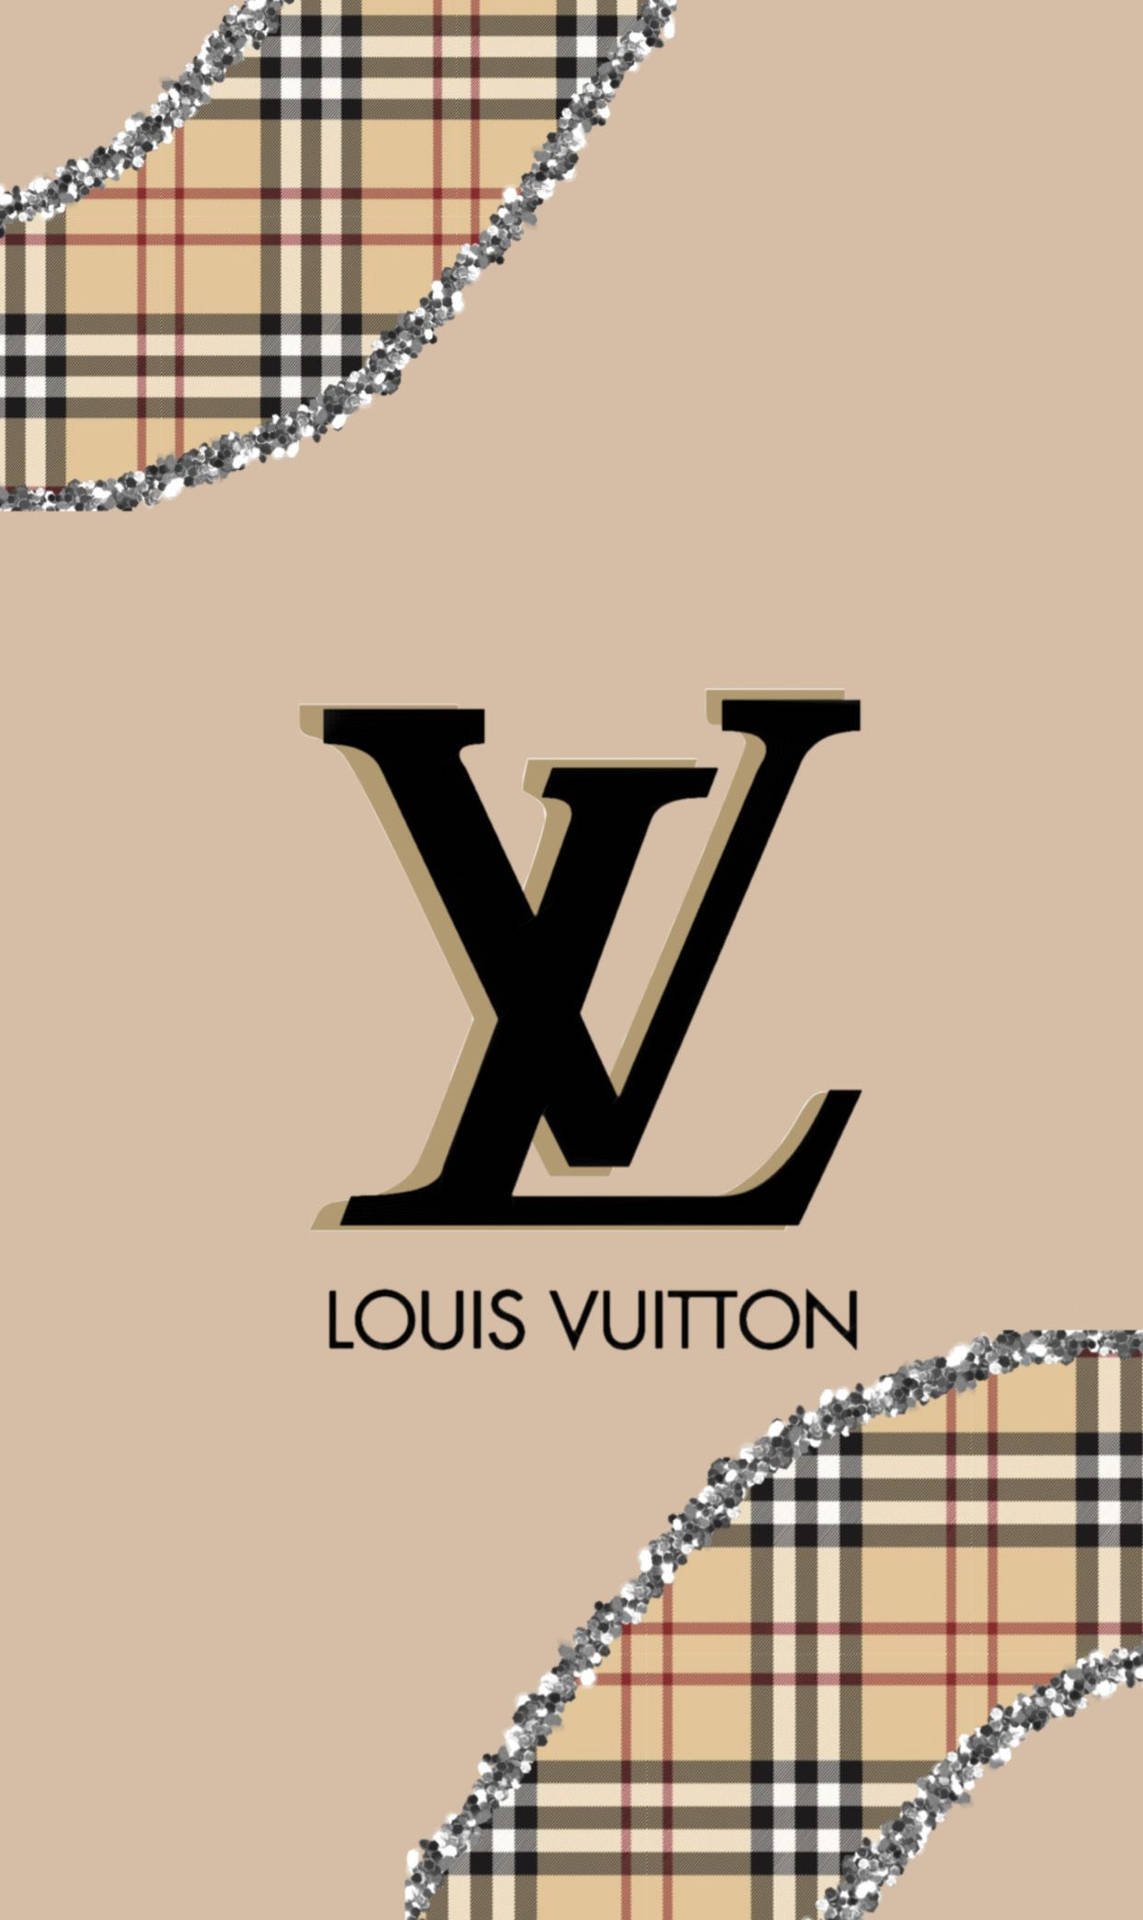 Download The Ultimate Louis Vuitton Aesthetic Wallpaper